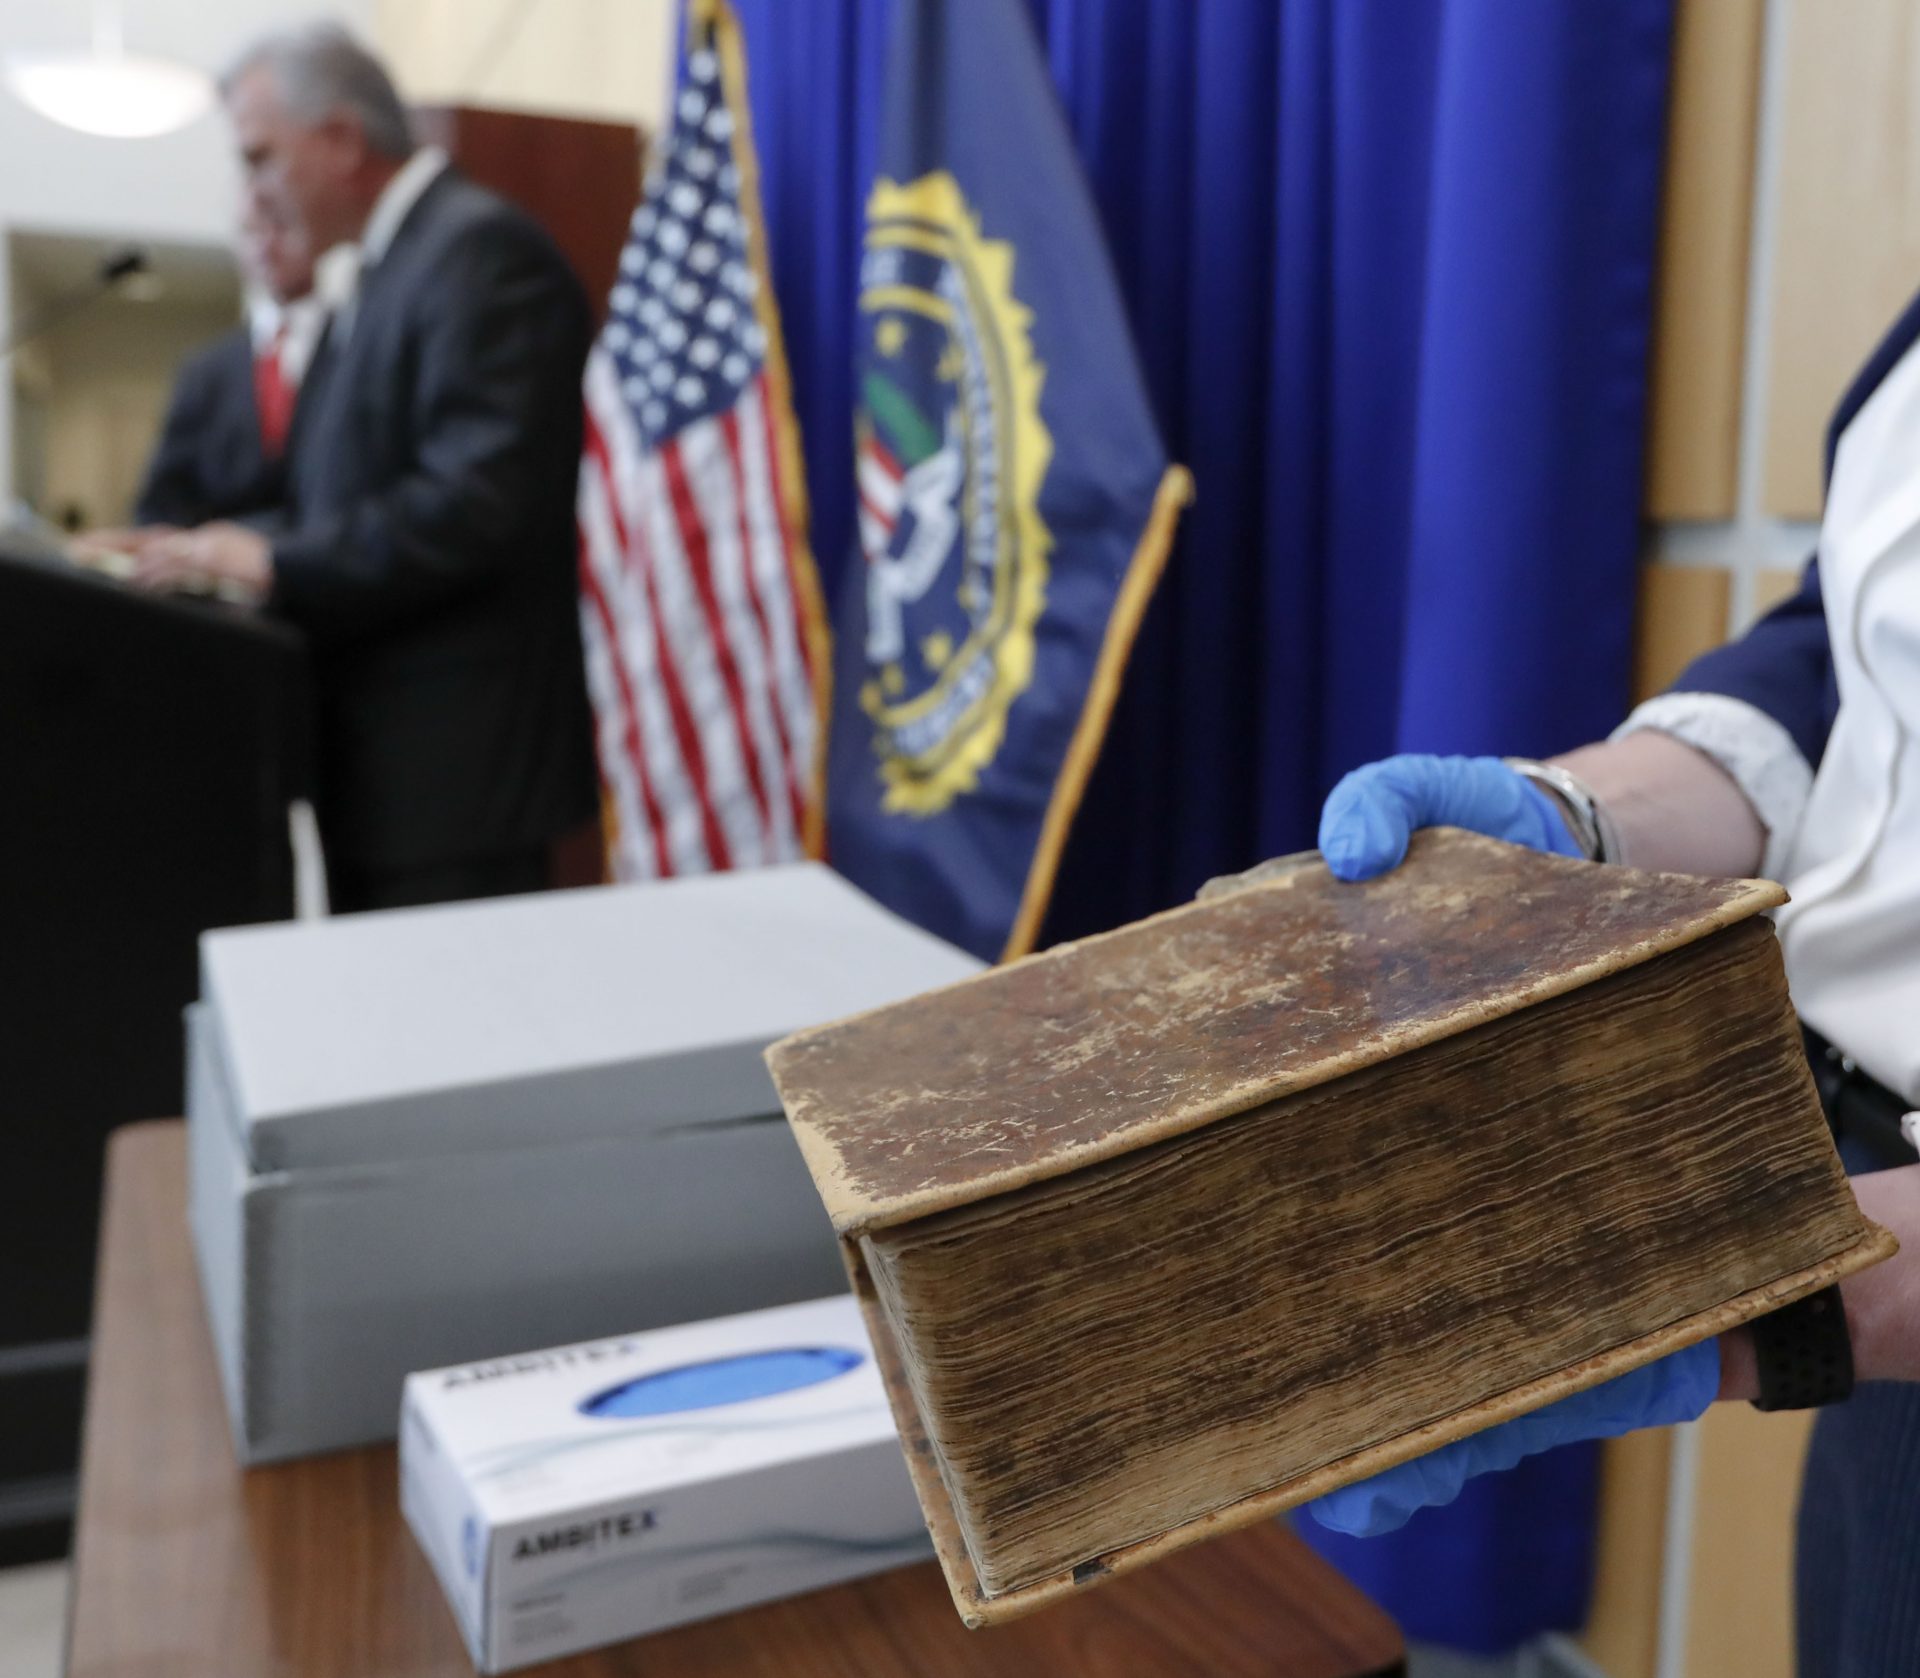 FBI Special Agent in Charge Robert Jones, left, and Allegheny County District Attorney Stephen Zappala, center, talk about the efforts and ultimate recovery of the Breeches Edition Bible that FBI supervisory special agent Shawn Brokos, right, holds during a news conference, Thursday, April 25, 2019, in Pittsburgh. The Bible that was published in 1615 was stolen from the Carnegie Library in Pittsburgh in the 1990's. It was traced to the American Pilgrim Museum in Leiden, Netherlands.